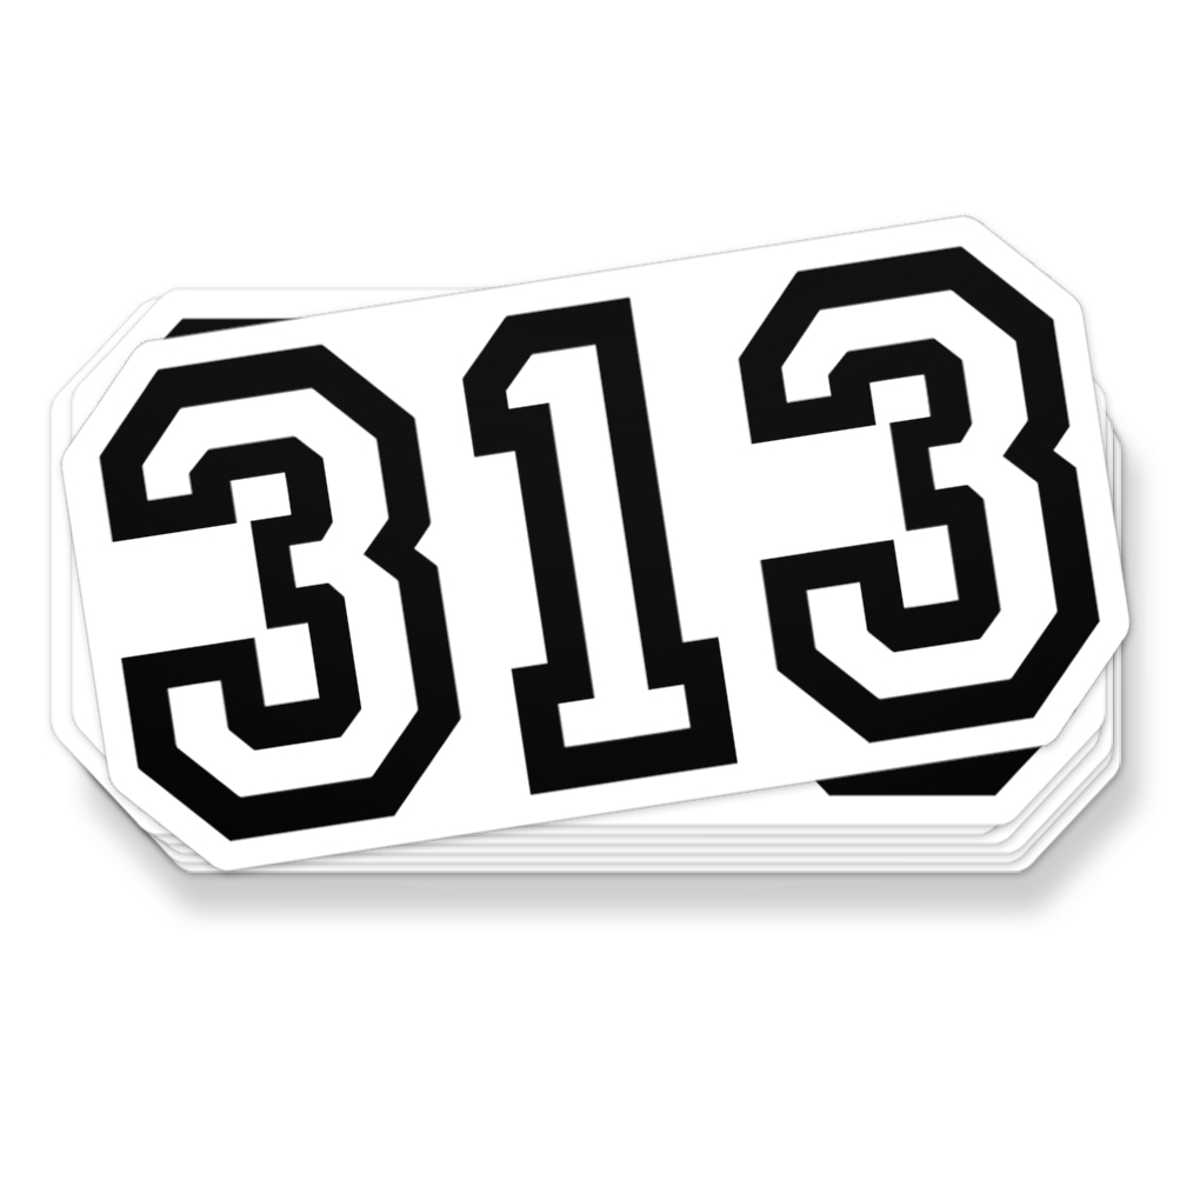 313 Sticker - Assorted Colors Stickers & Wall Art Sticker/Decal Black/White 